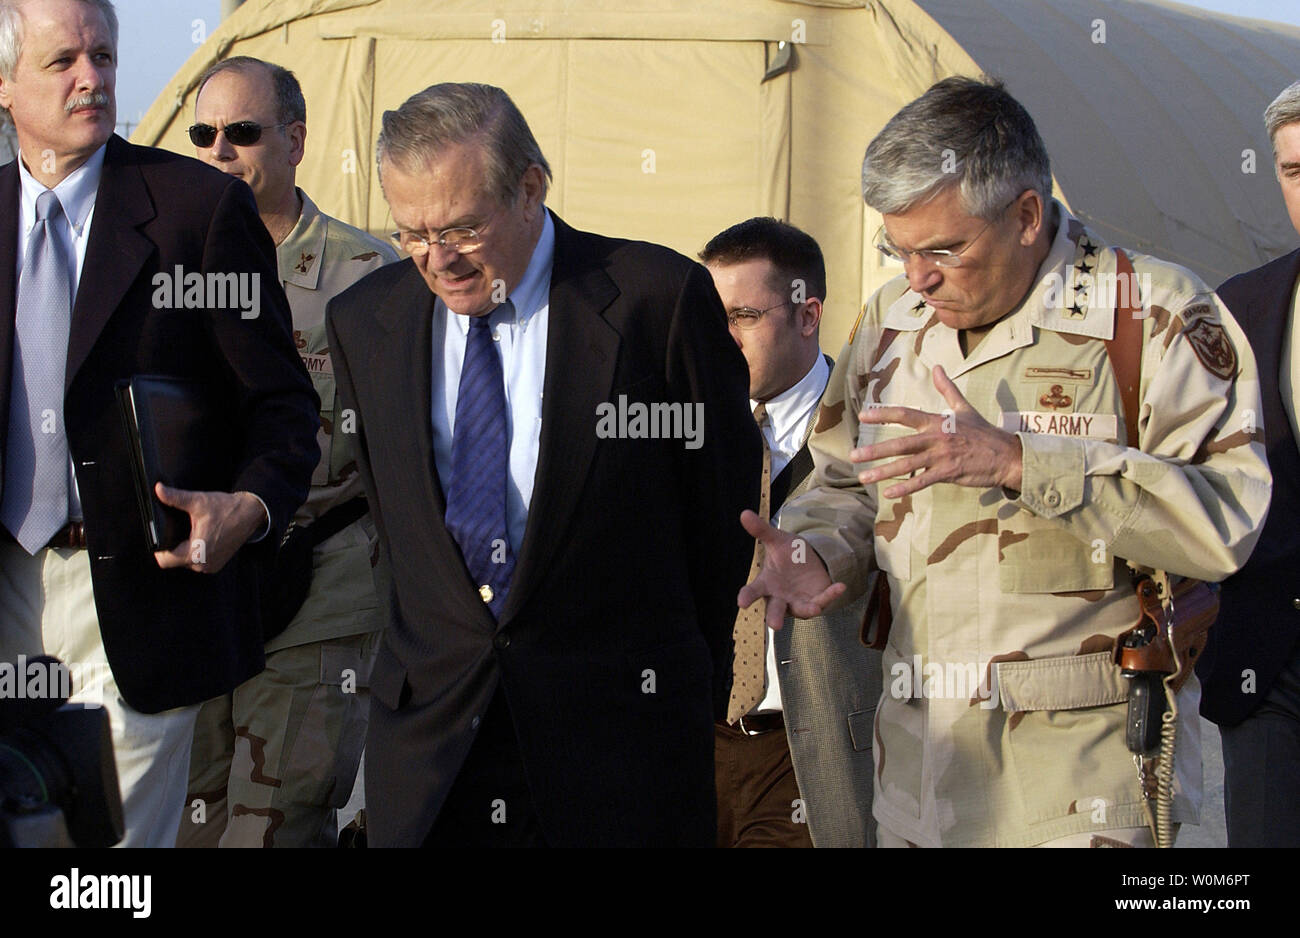 Commander of the Multi-National Forces-Iraq Gen. George Casey, U.S. Army, talks with Secretary of Defense Donald H. Rumsfeld as they walk through Camp Sather at Baghdad International Airport in Iraq on April 12, 2005.  Rumsfeld met earlier with senior leaders from the Multi-National Forces-Iraq and Multi-National Corps-Iraq. Rumsfeld is in Iraq to visit with U.S. and coalition forces and to meet with the newly elected members of the Iraqi government.   (UPI Photo/ Cherie A. Thurlby/Air Force) Stock Photo